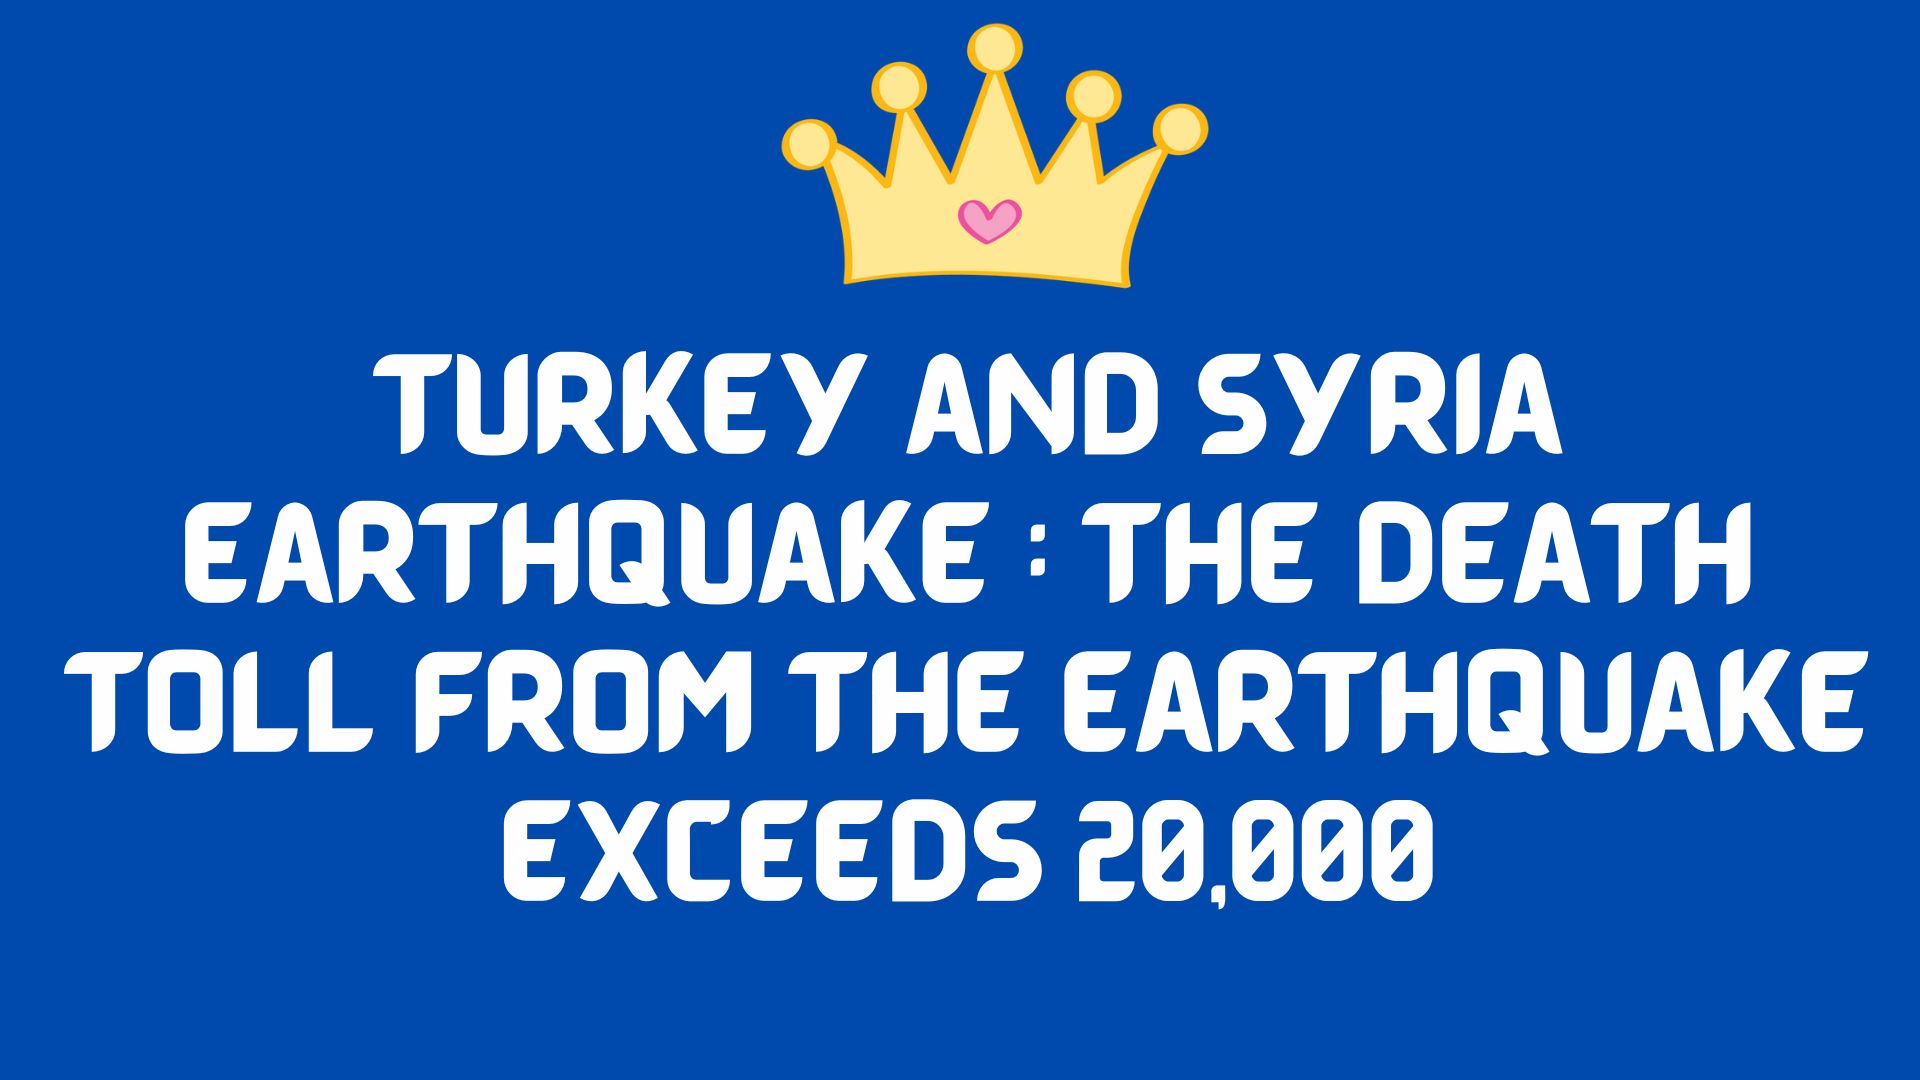 Turkey and syria earthquake : the death toll from the earthquake exceeds 20,000